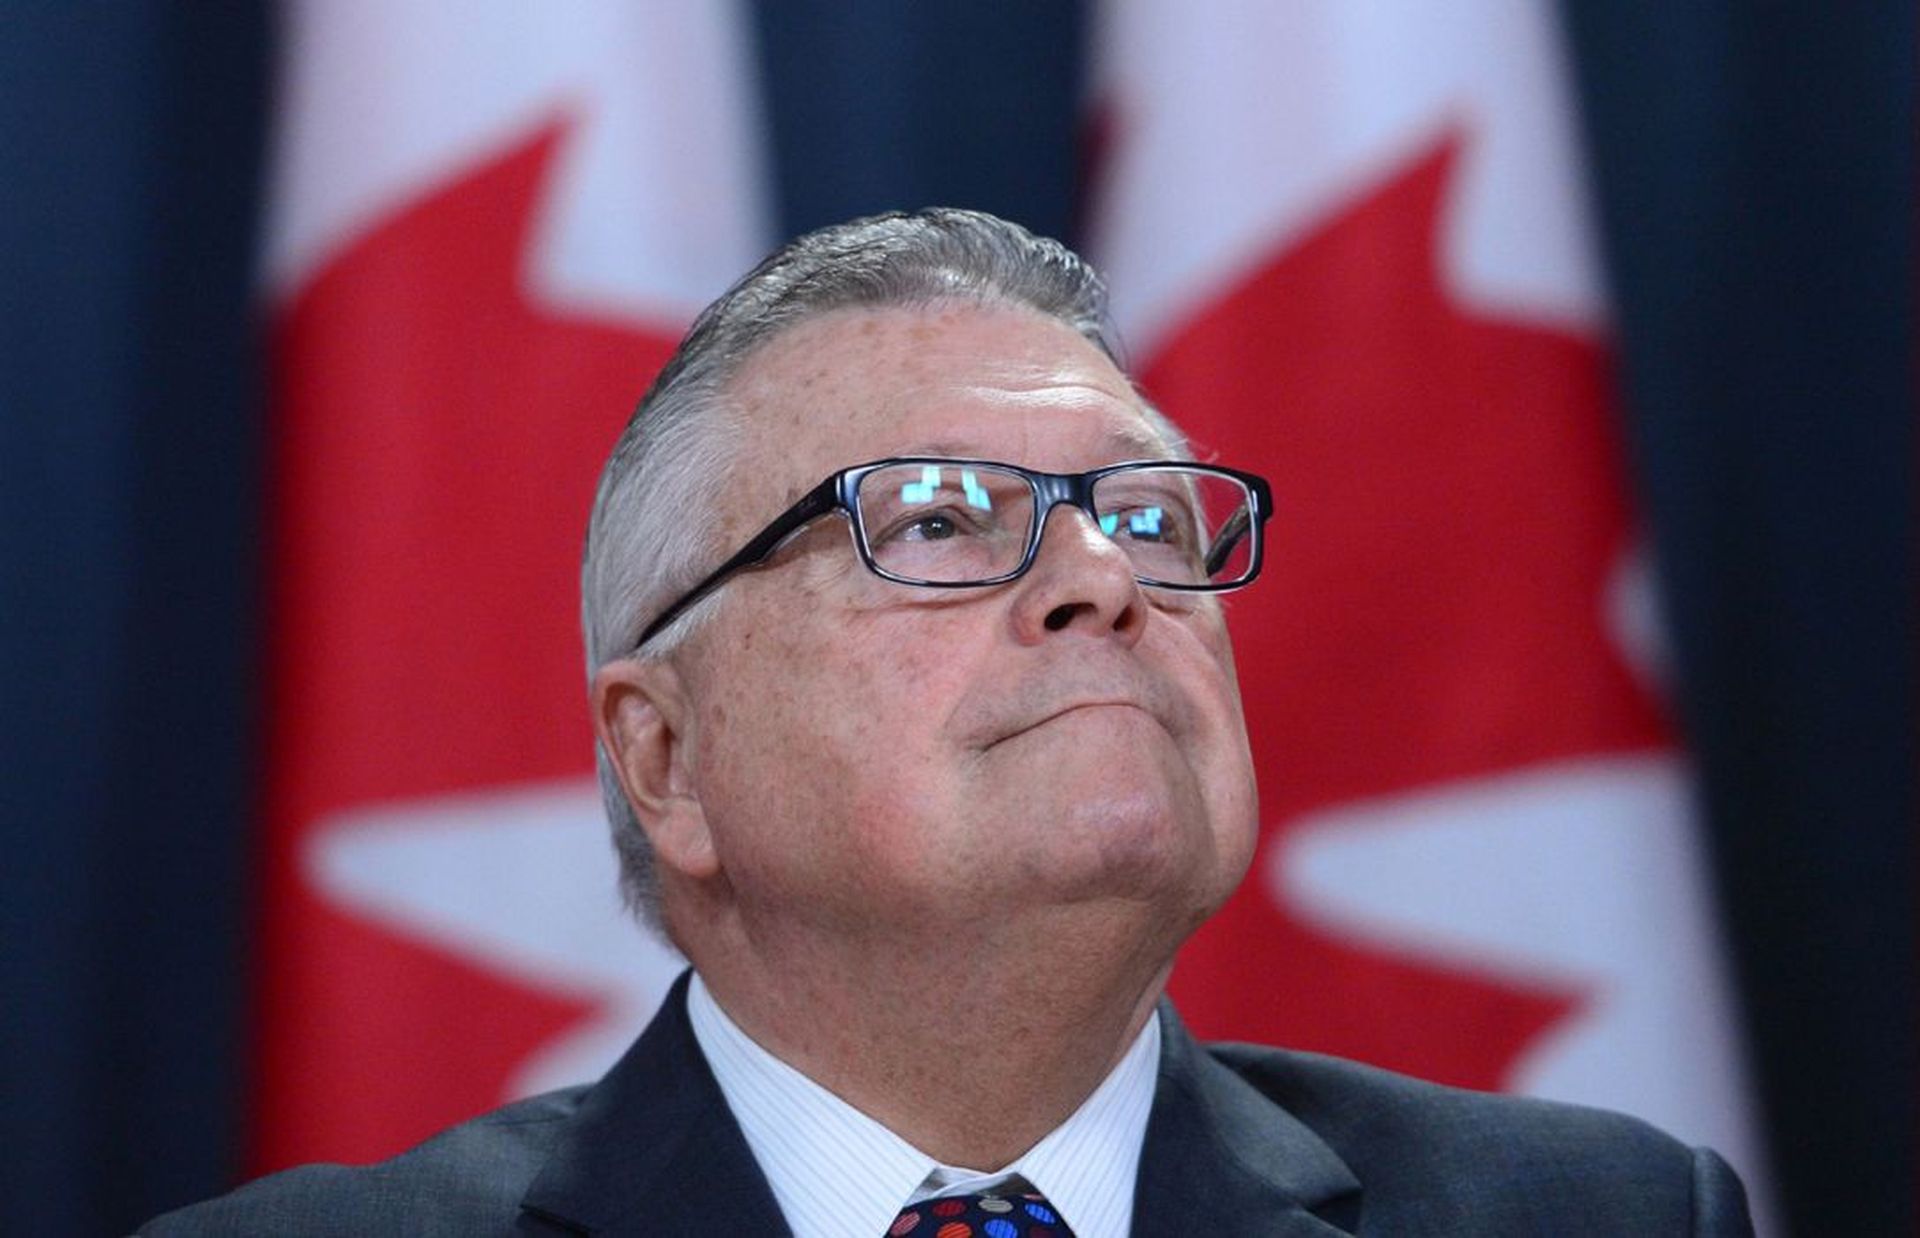 Canada Safety Minister Ralph Goodale